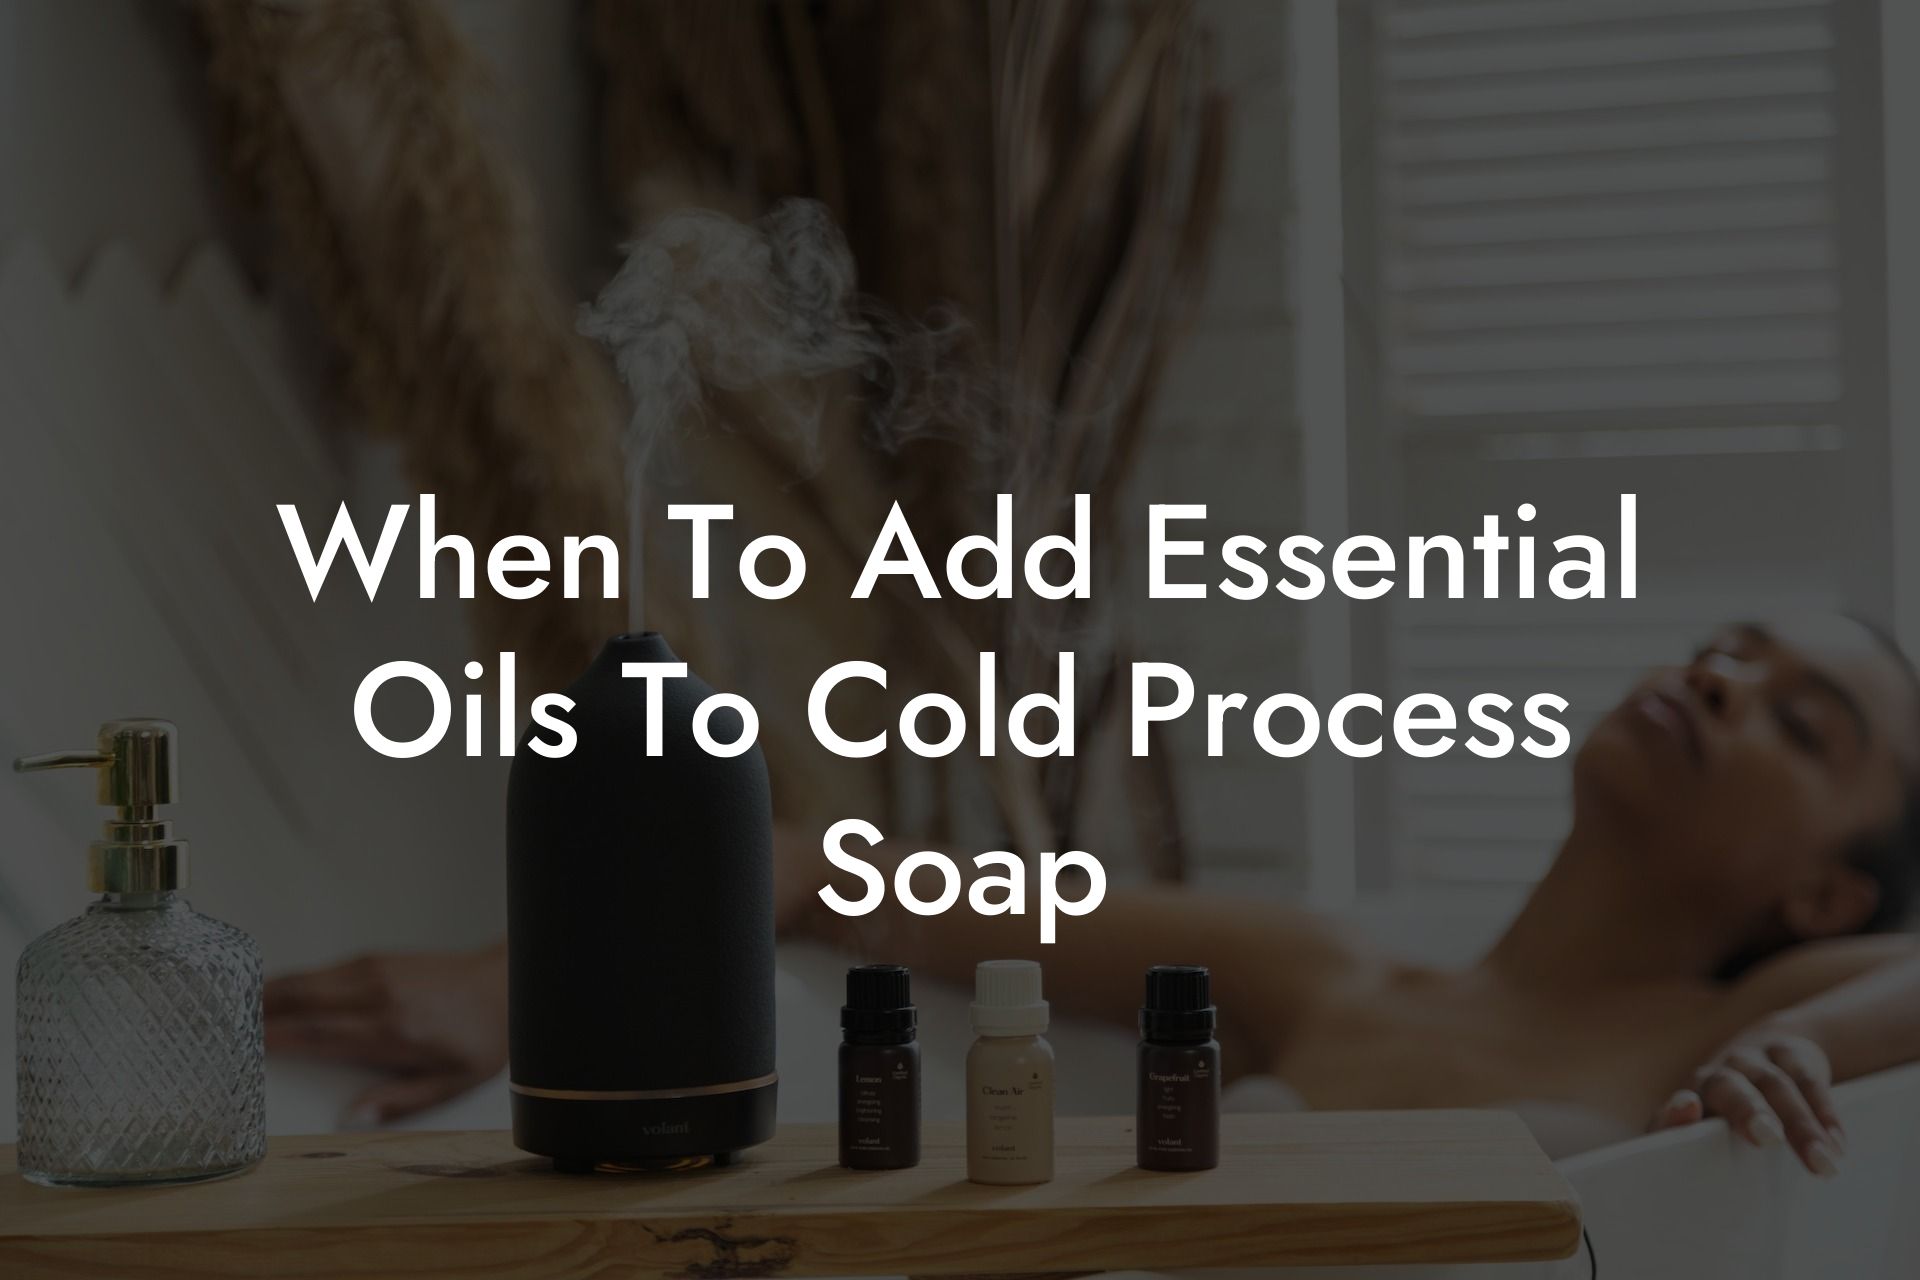 When To Add Essential Oils To Cold Process Soap